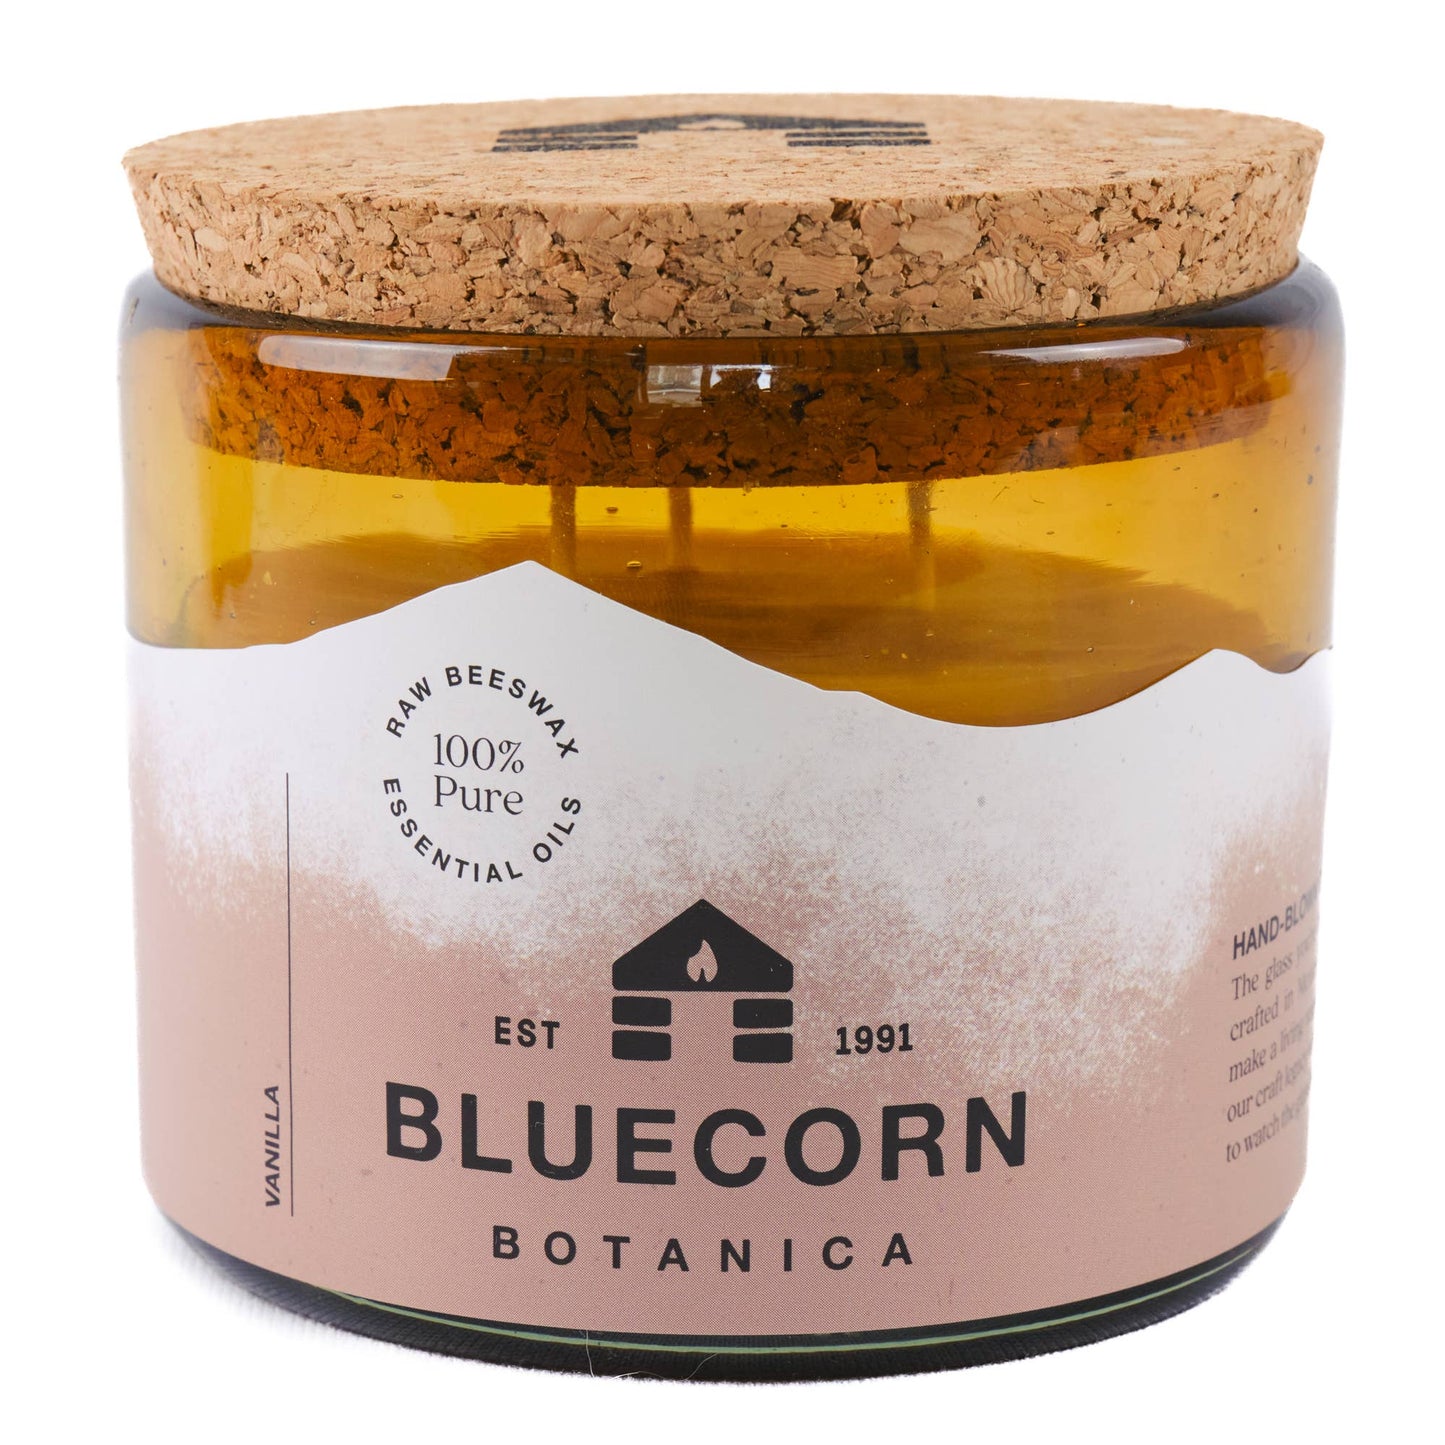 NEW Beeswax Botanica Candle in Blown Glass: Spruce / 8 oz